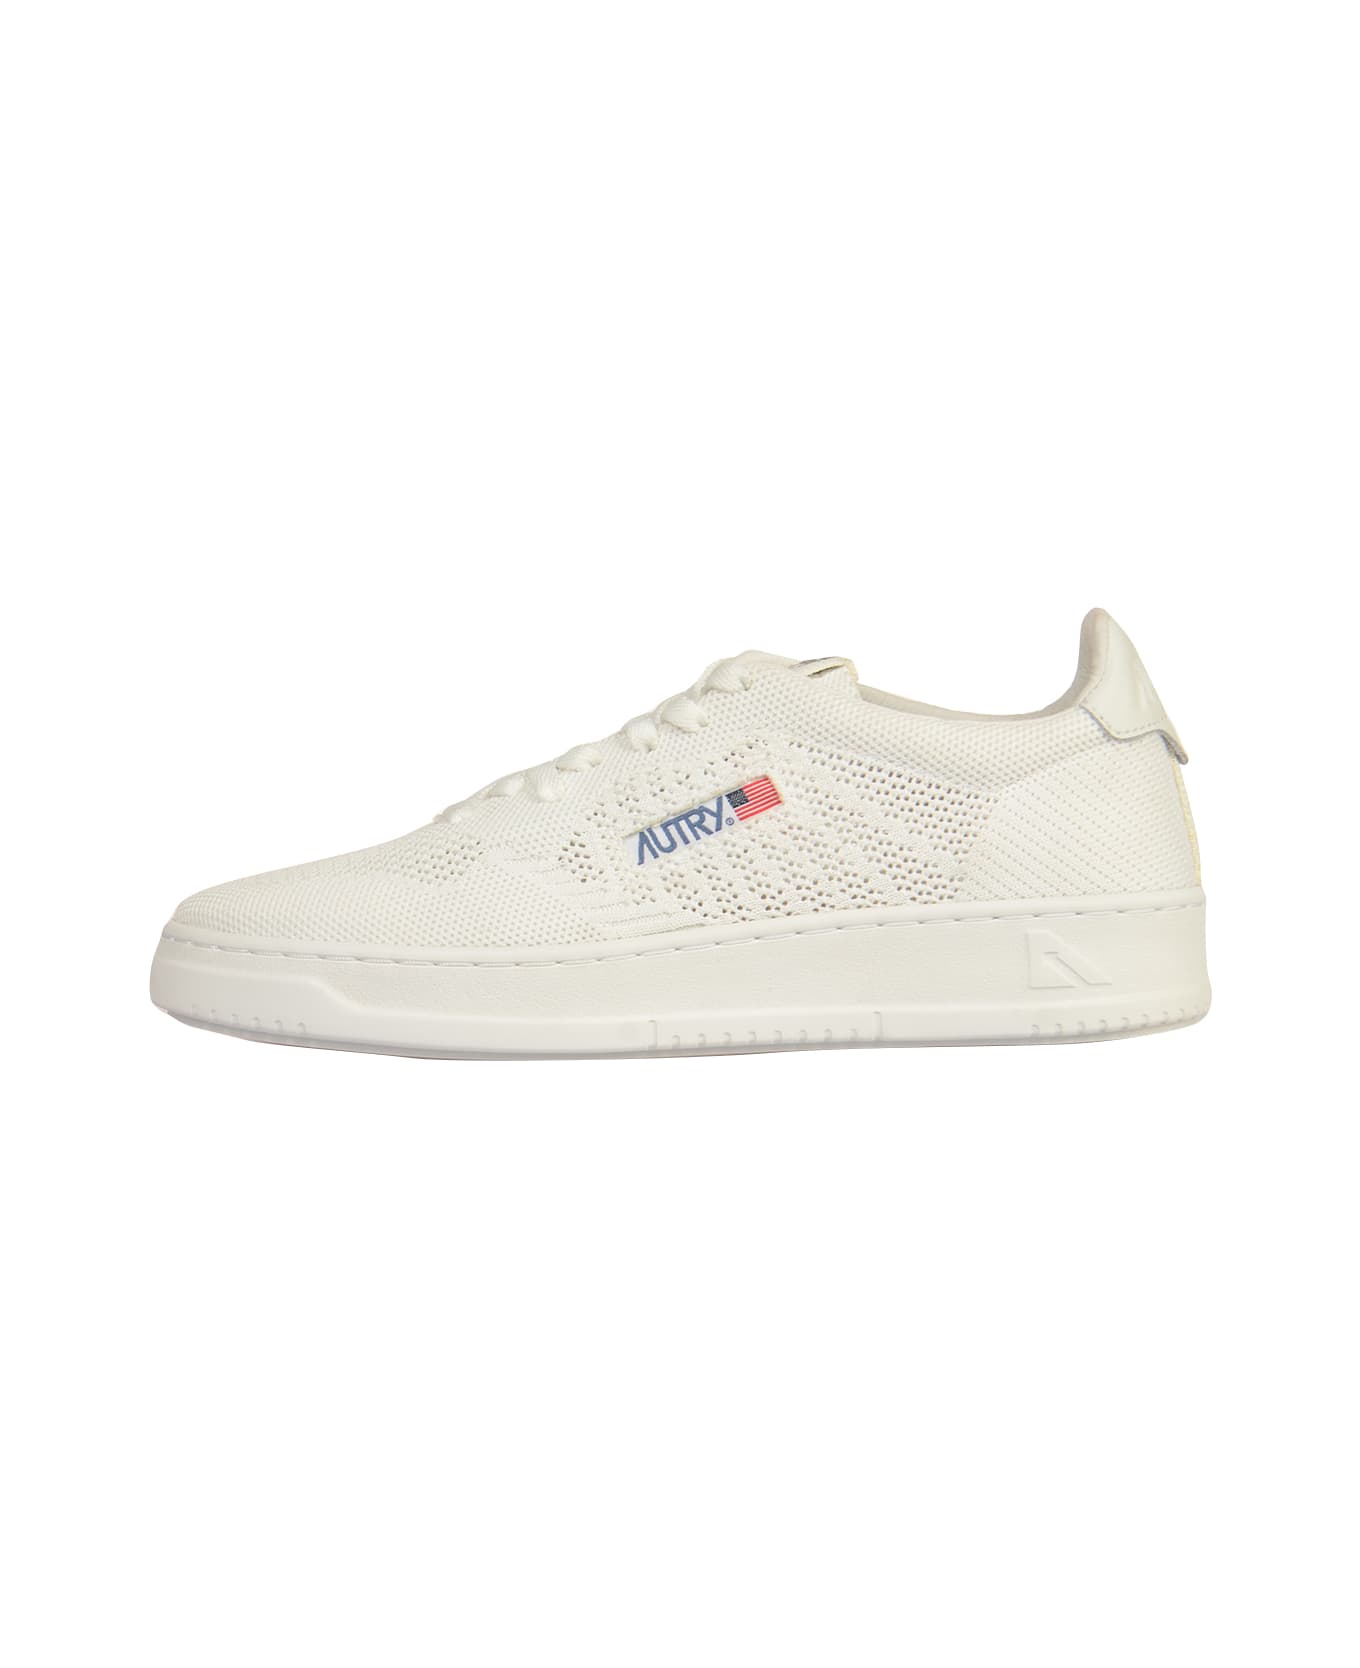 Autry Easeknit Low Sneakers - White